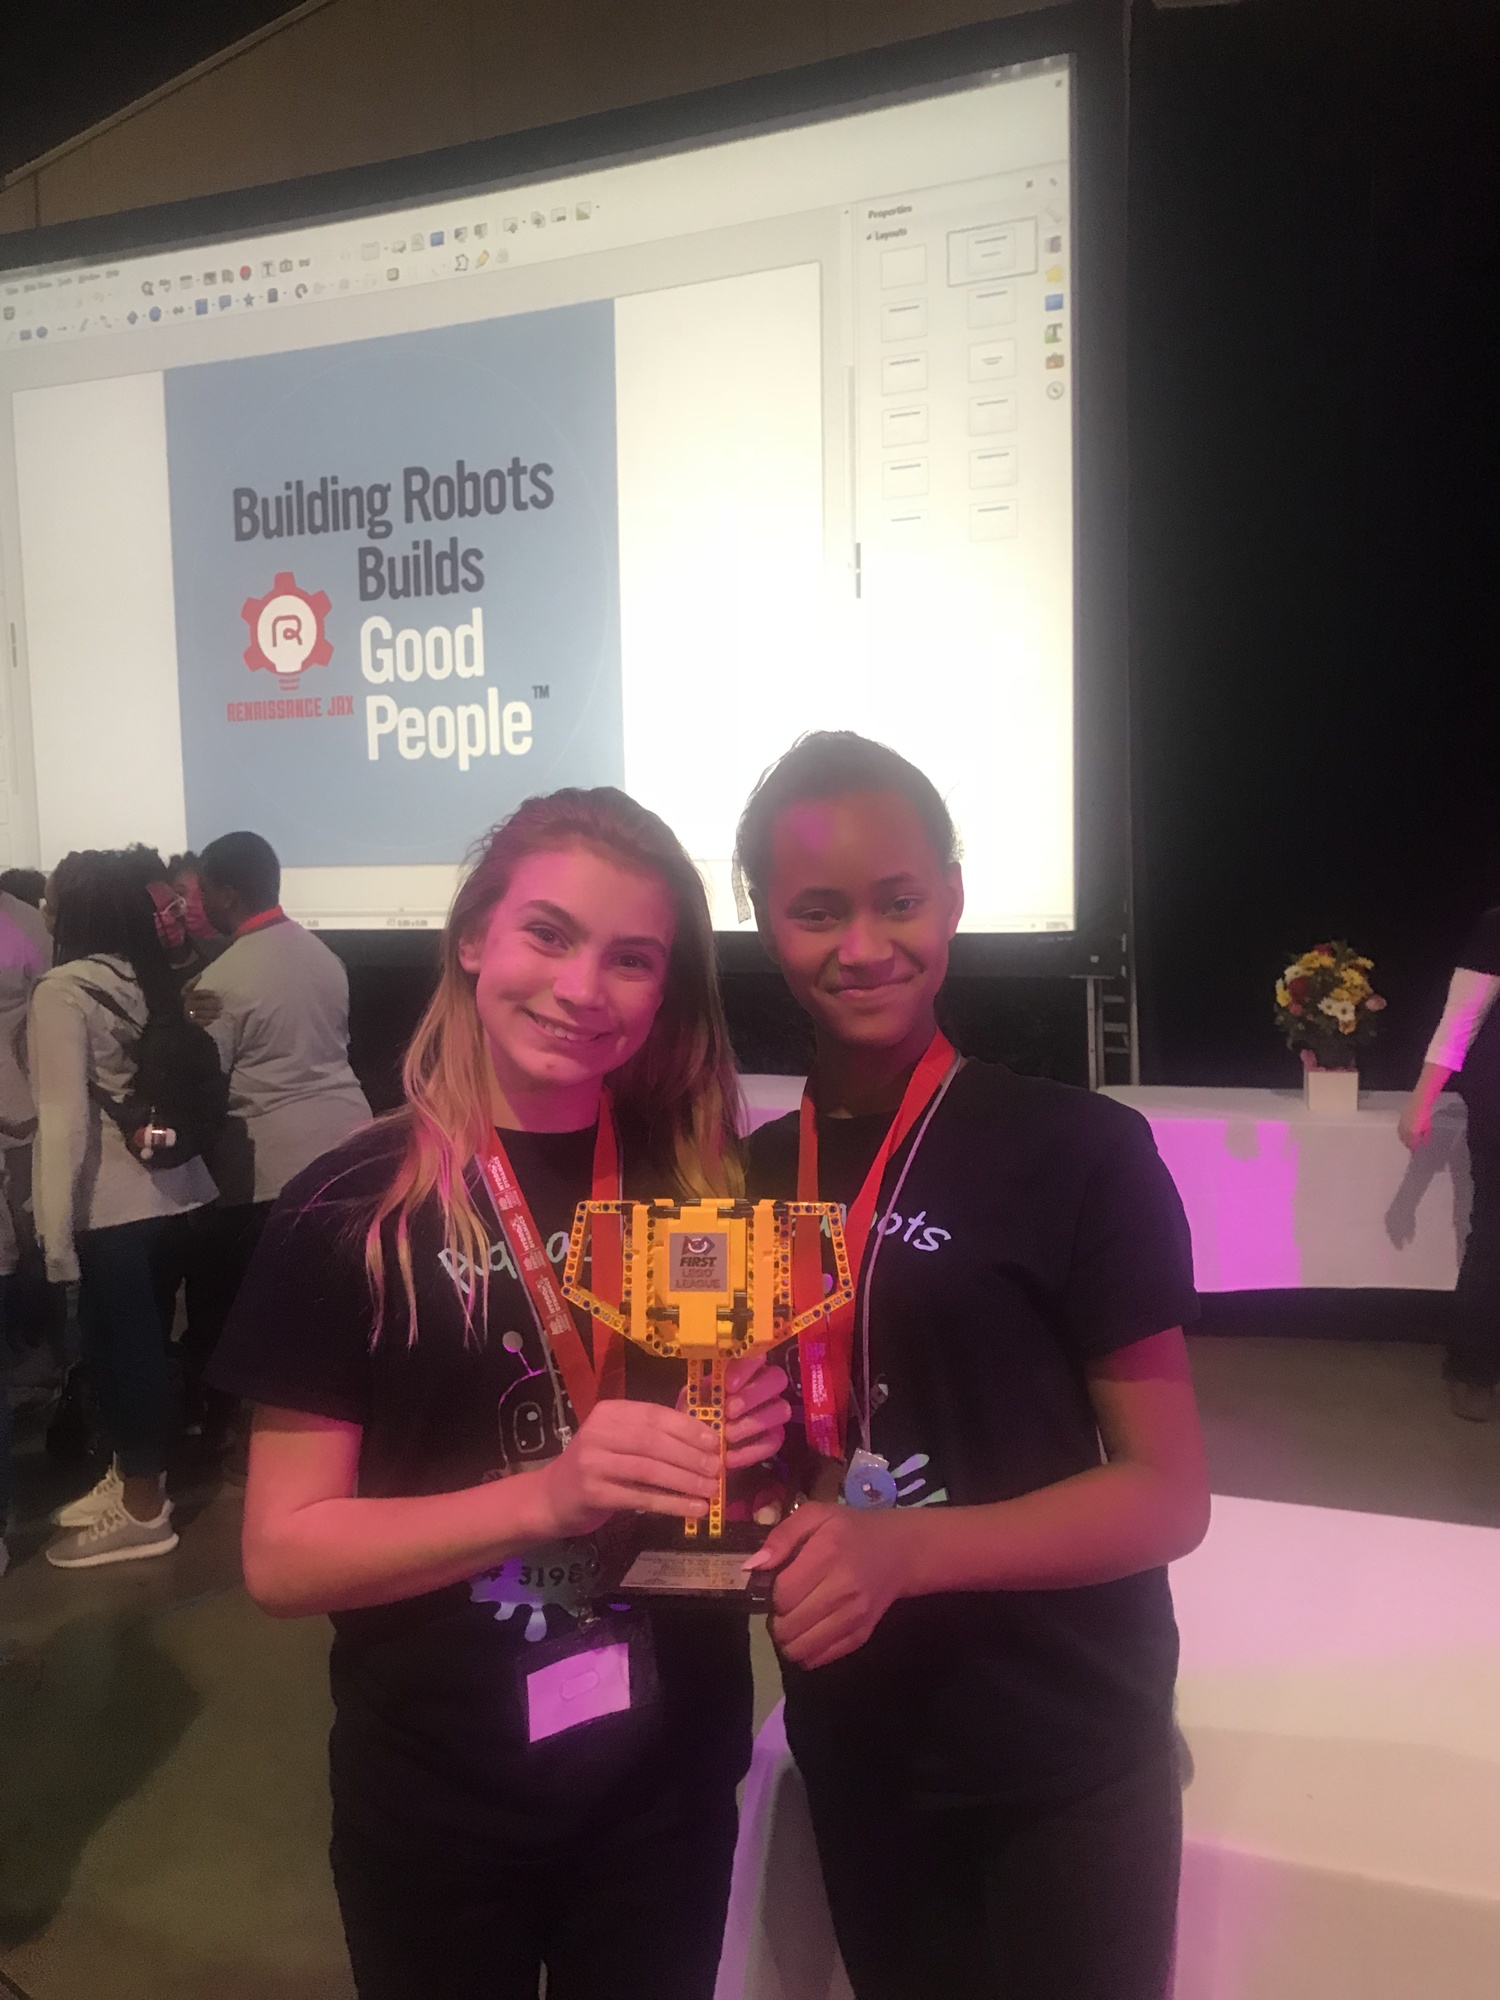 Indian Trails Middle School seventh-graders Kadance Nickmeyer and Alexandria (Lexi) Murray won the “Rising Star” award at the regional robotics competition with their Girl Scout team. Photo courtesy of Tania R. Schmidt-Alpers